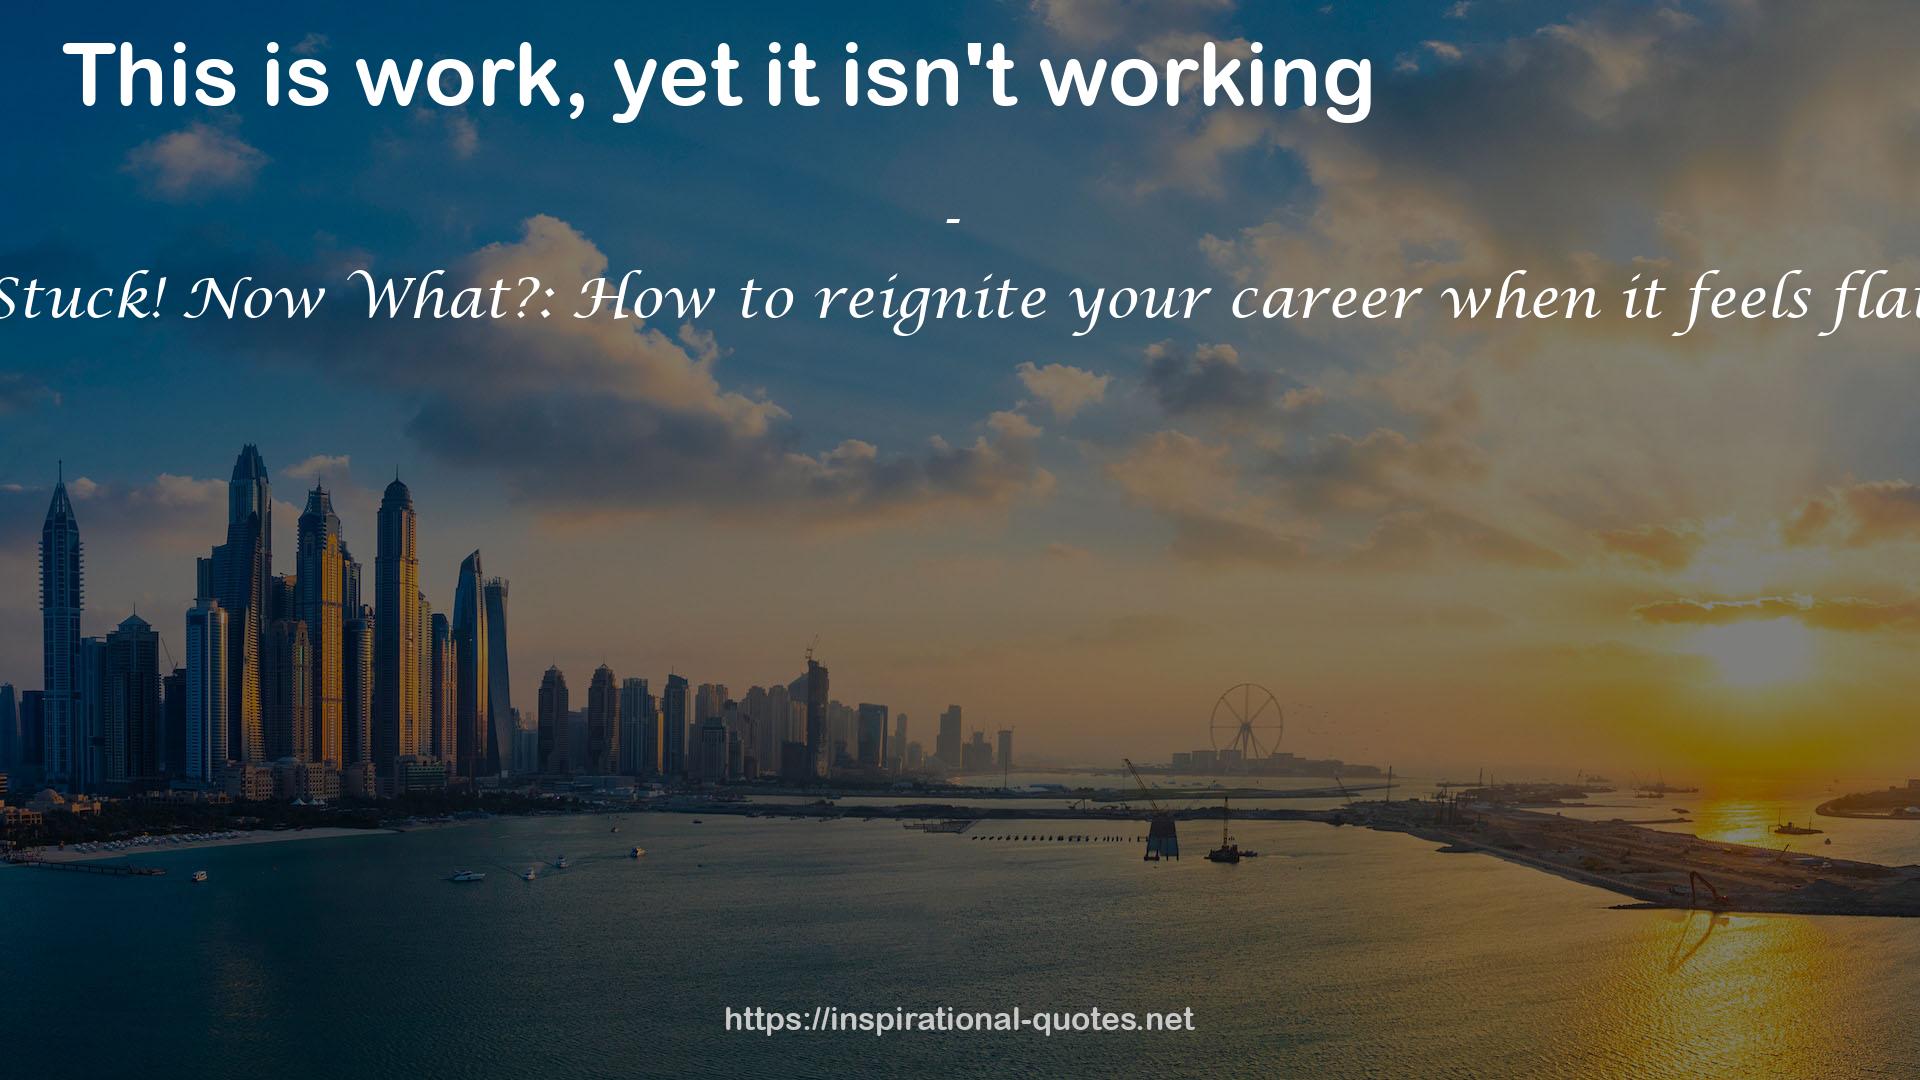 Stuck! Now What?: How to reignite your career when it feels flat QUOTES